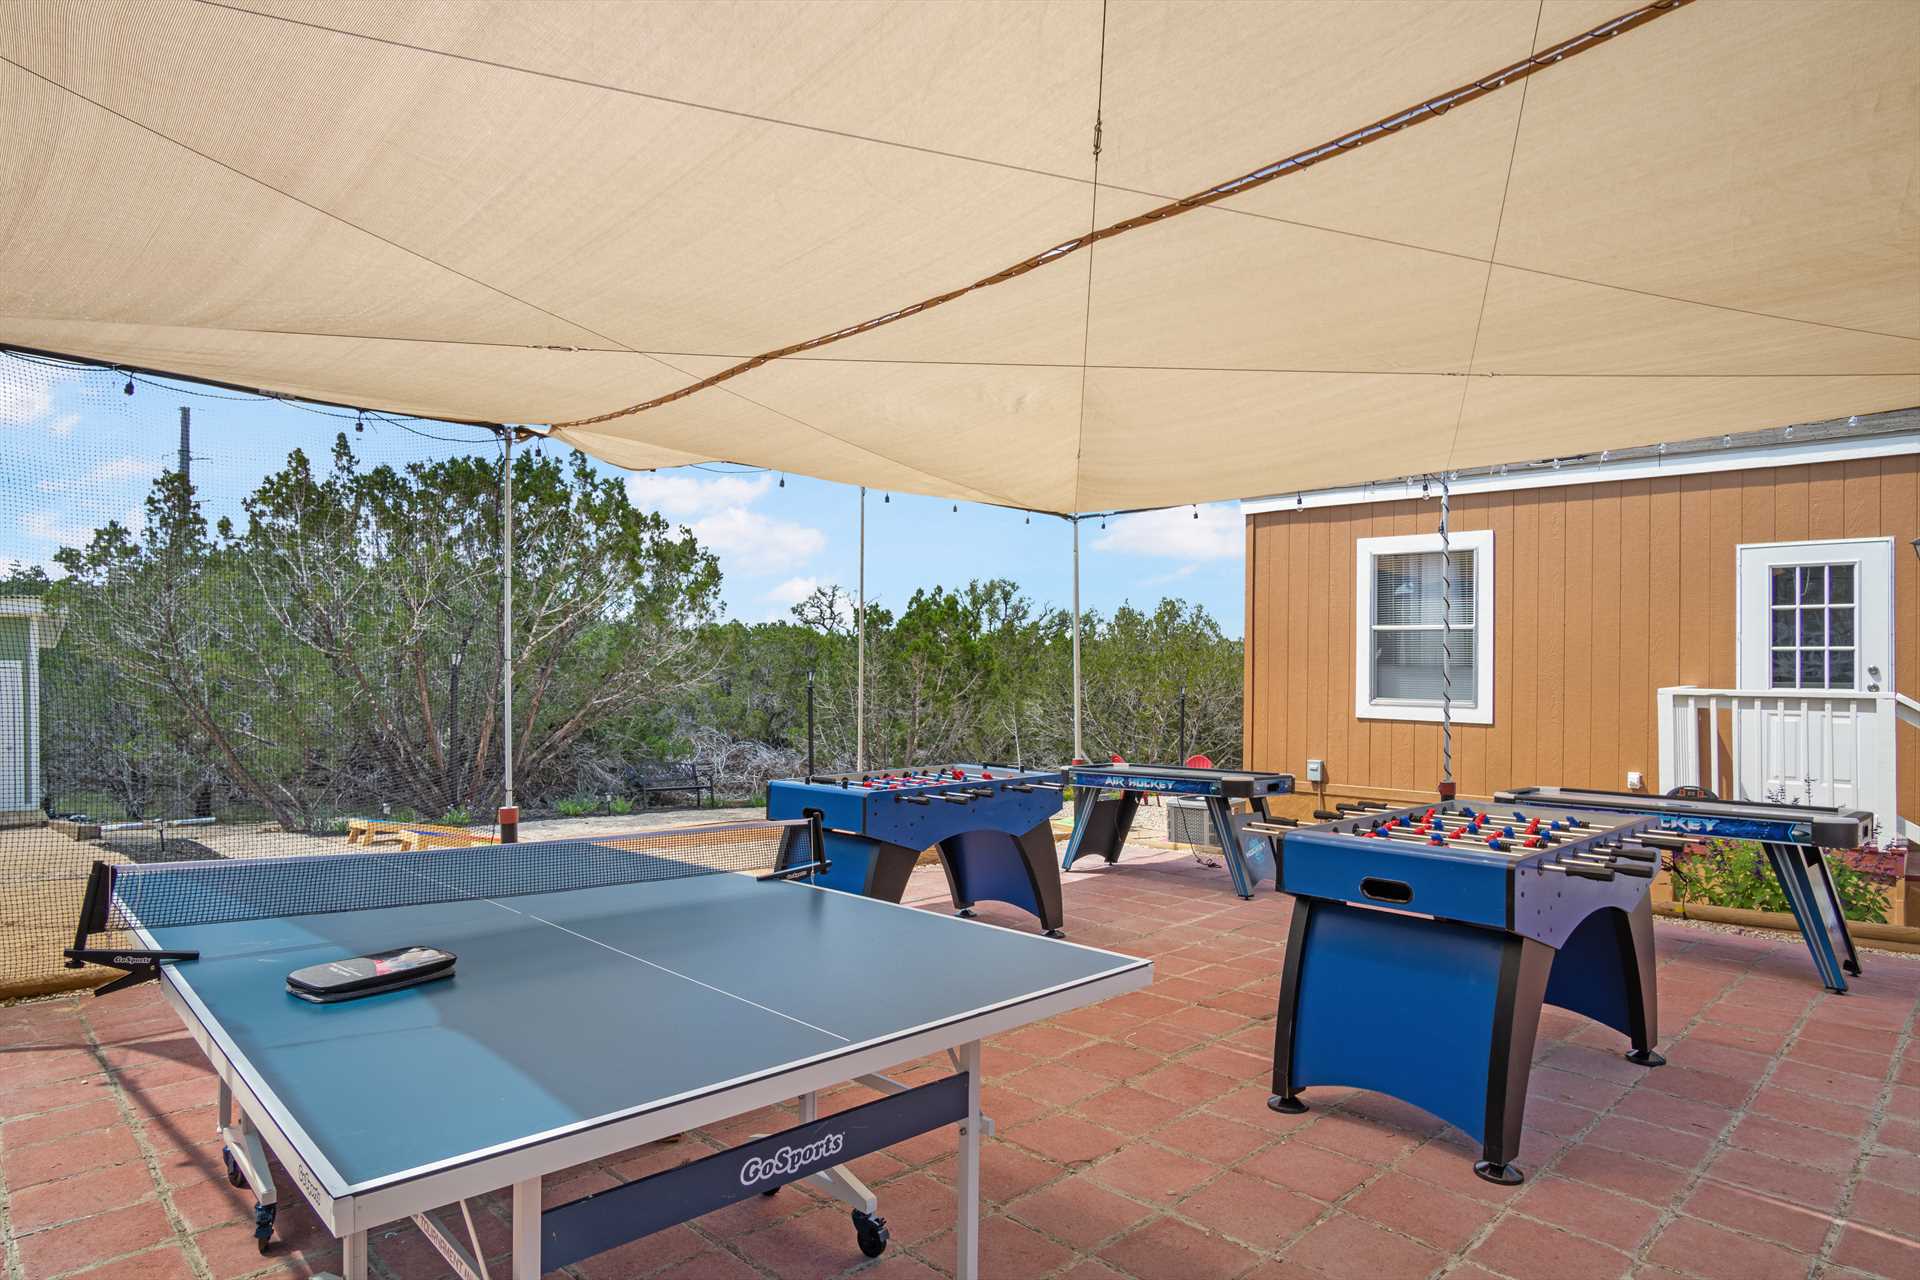                                                 Enjoy your air hockey, ping pong, and foosball games in cool comfort! The tables are nicely shaded against the Texas sun.